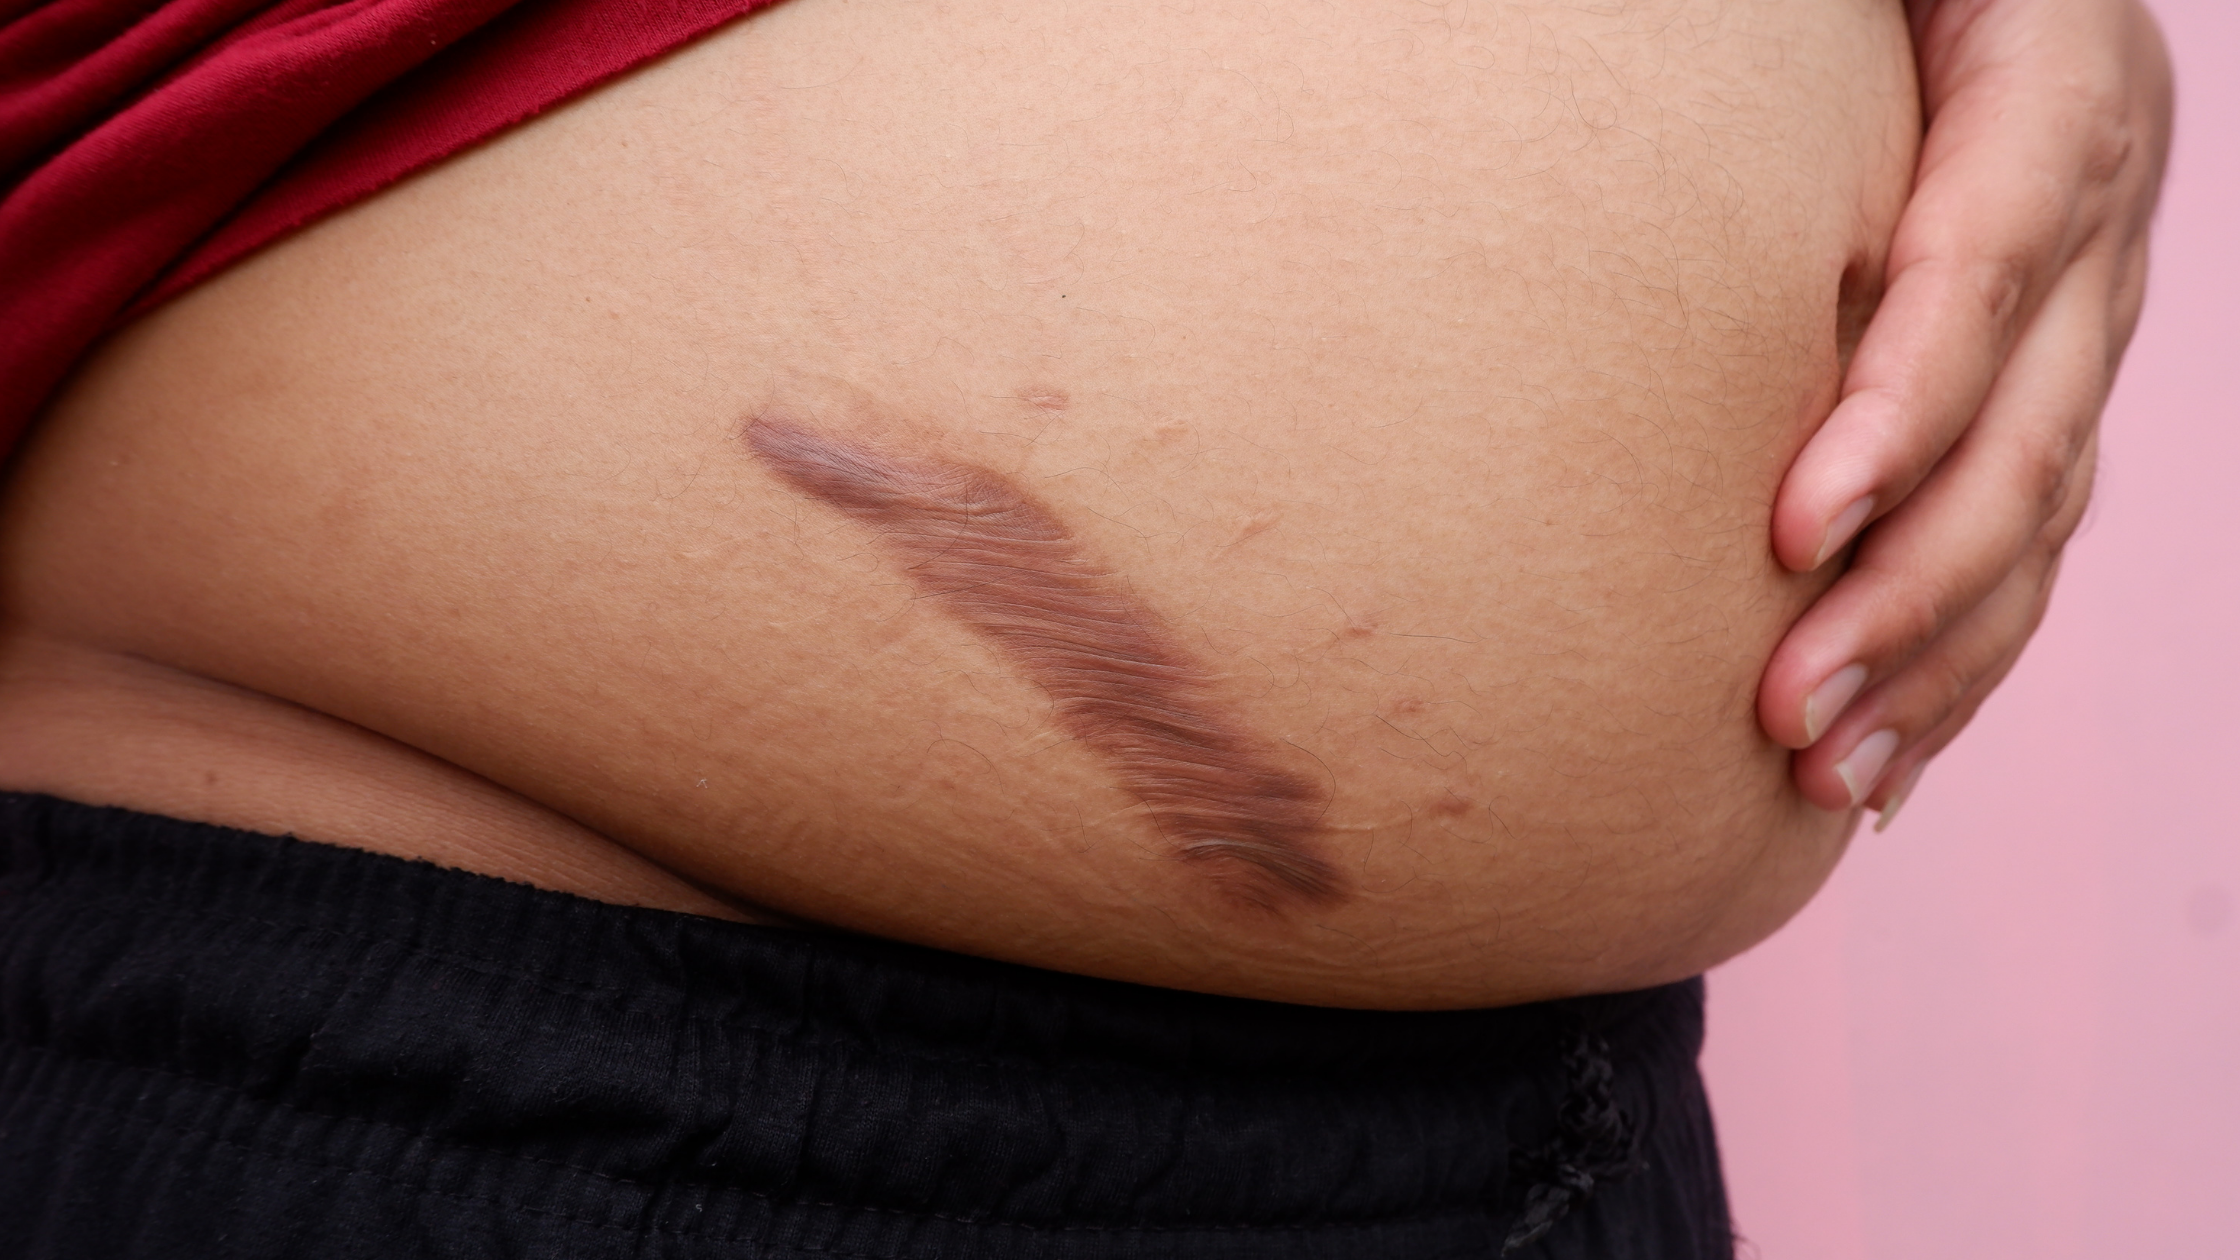 a woman 's stomach with a scar on it